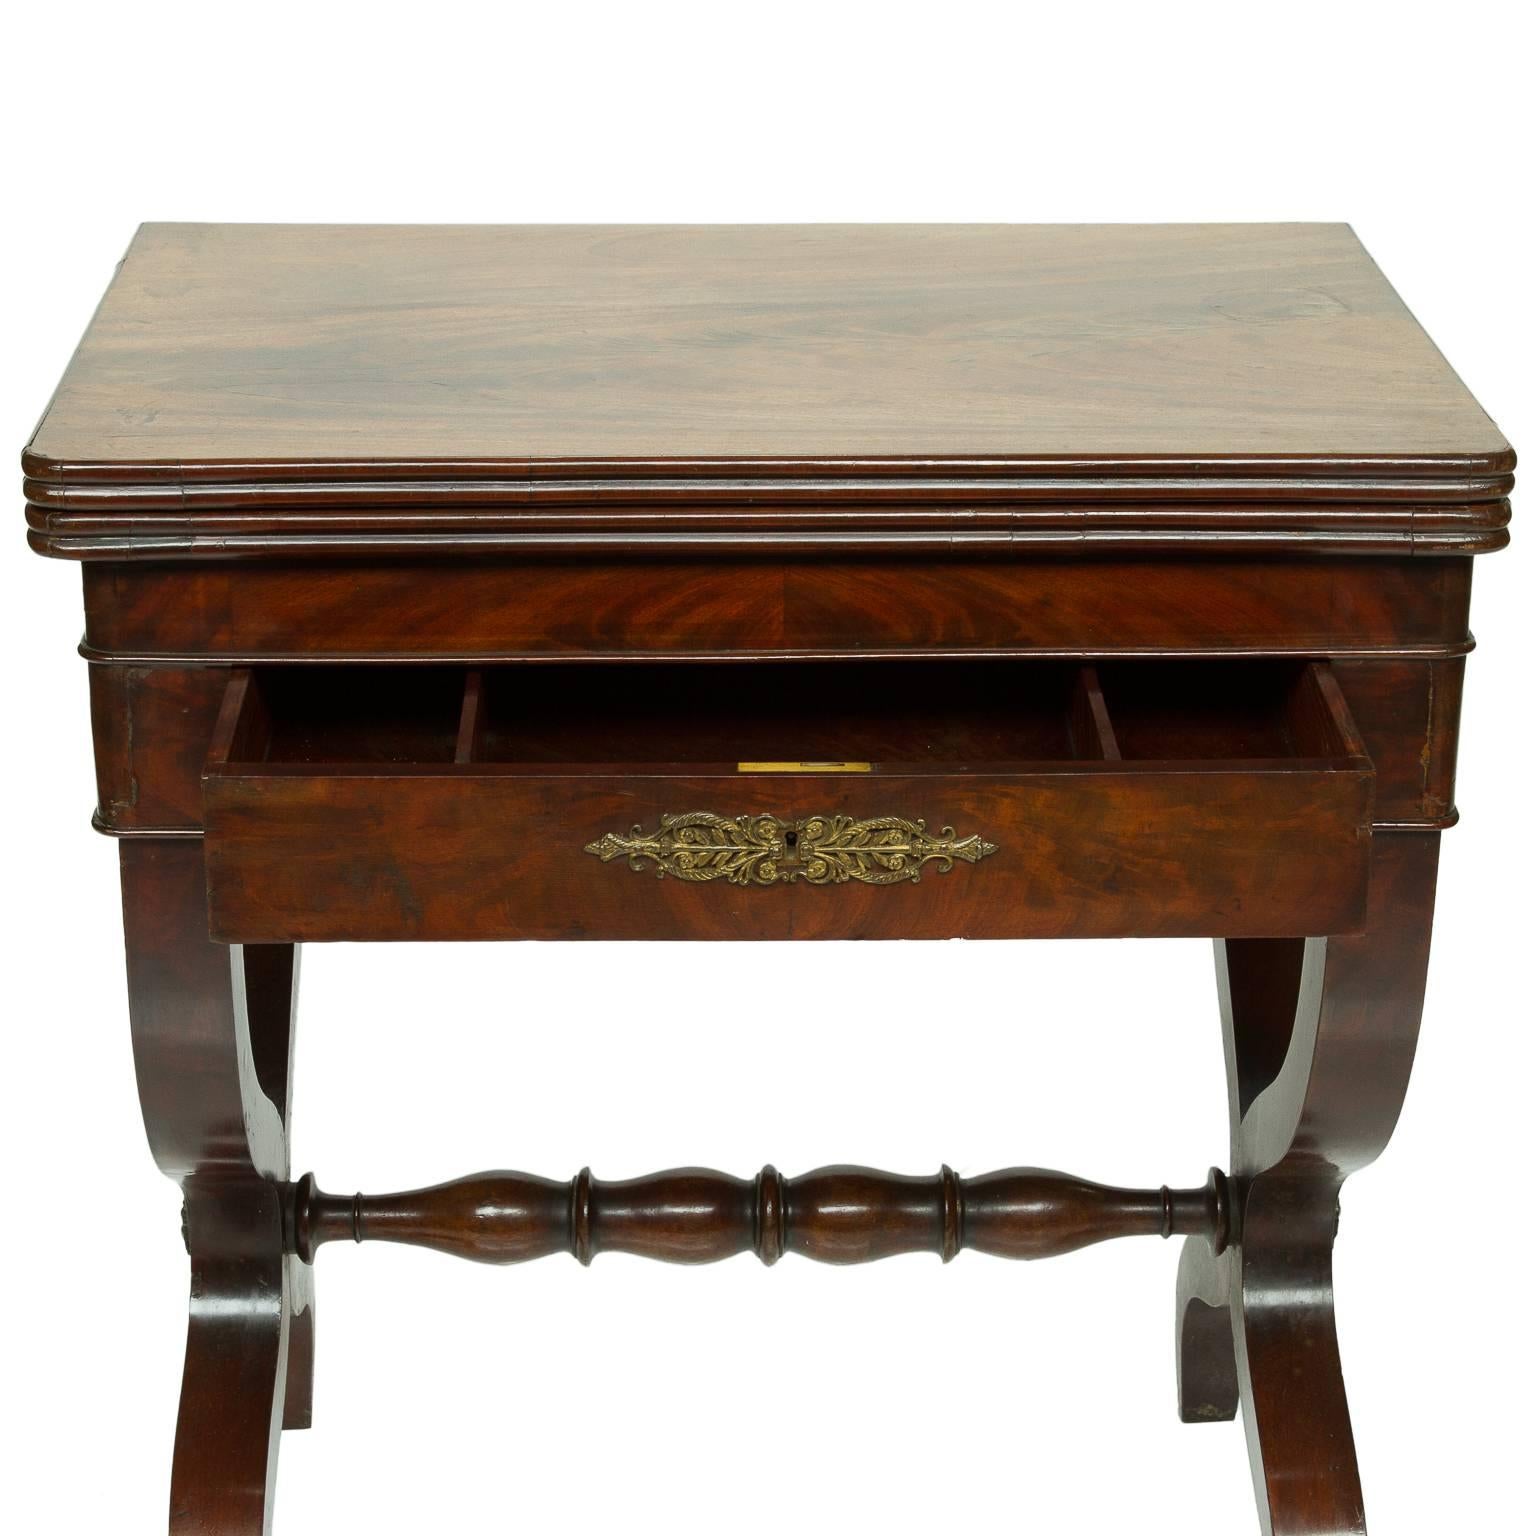 Lovely little early 19th century foldover card table of continental origin, circa 1820. Stands flat against the wall as a handsome little console table, just 26″ wide. Rotate and fold open the top to reveal a green baize playing surface for cards